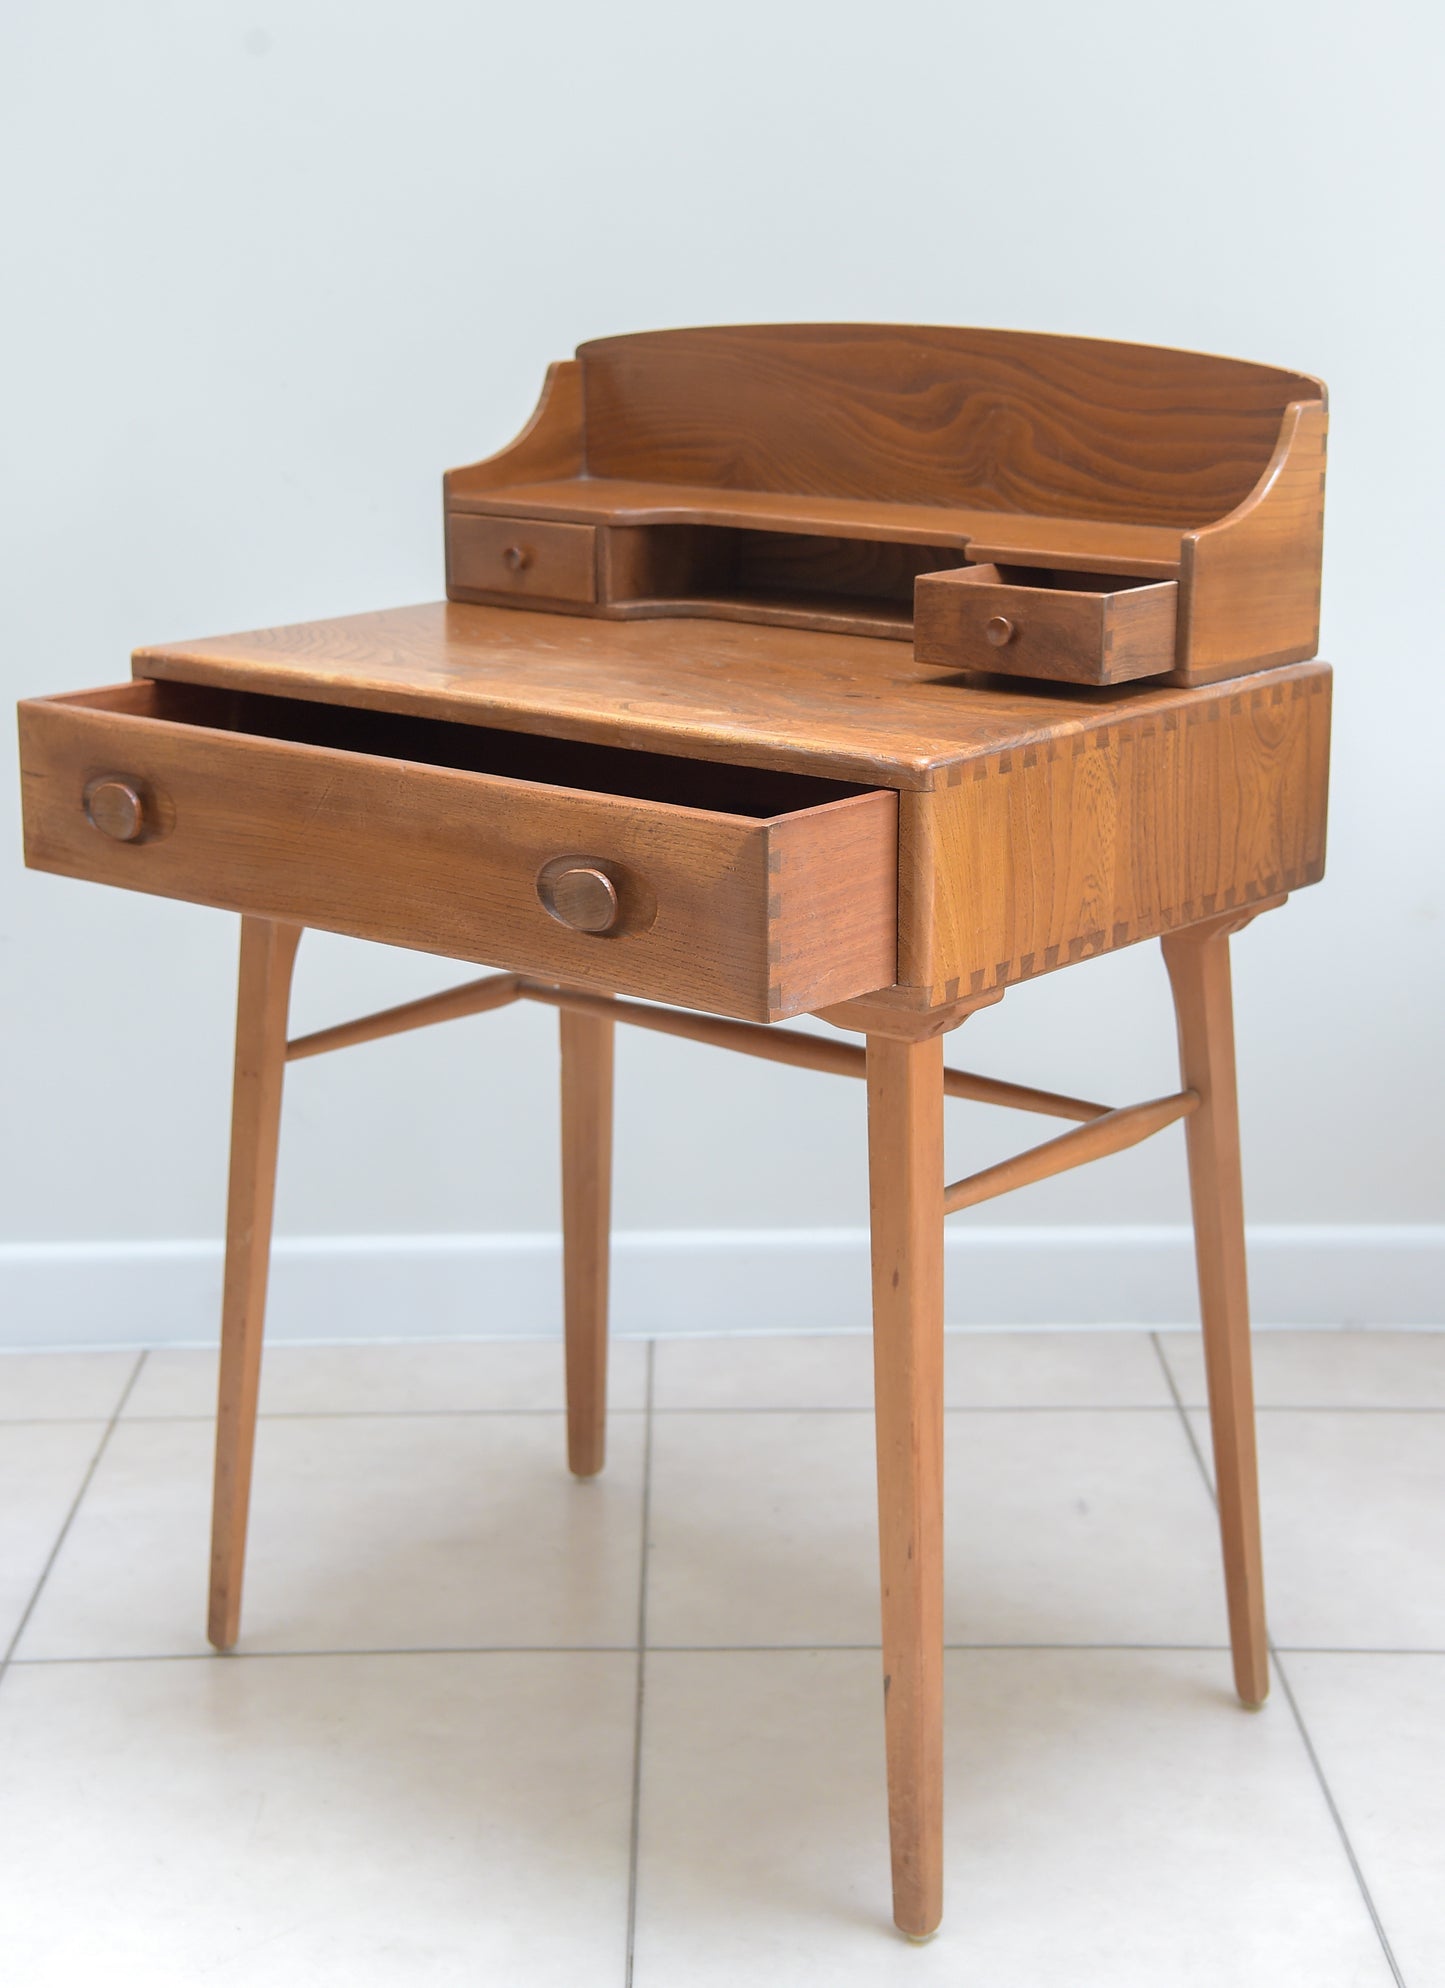 VINTAGE BLUE LABEL WRITING DESK BY LUCIAN ERCOLANI FOR ERCOL